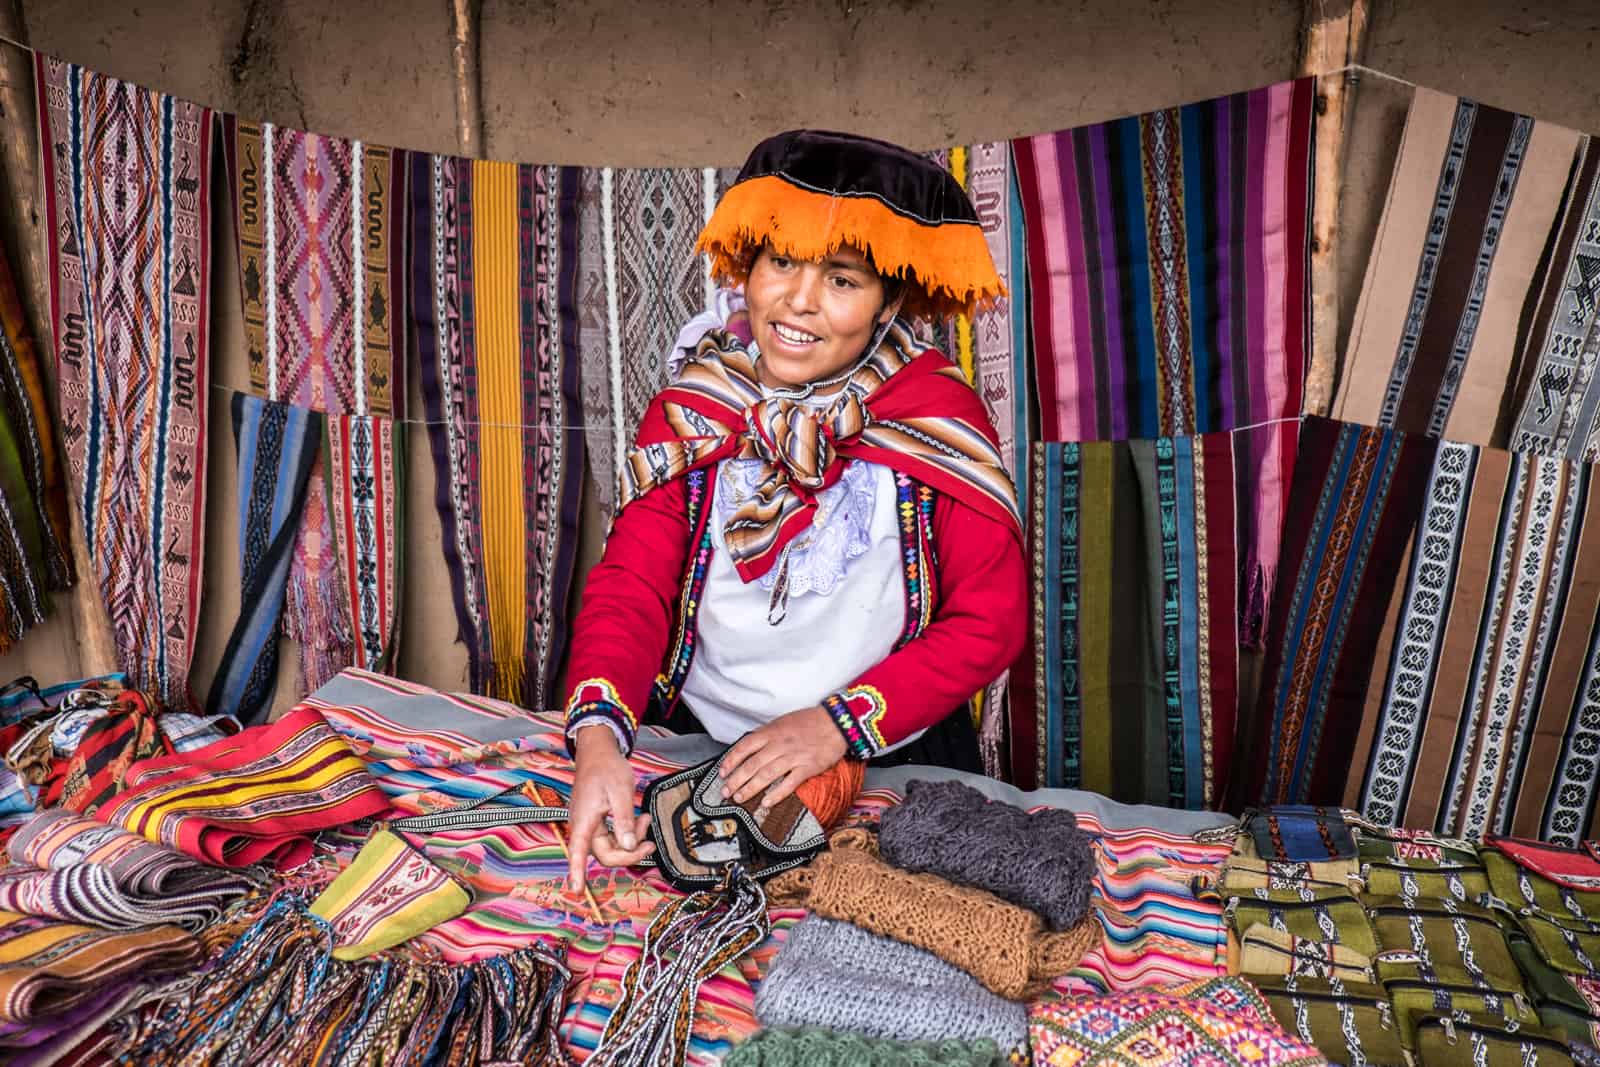 A Peruvian woman in traditional dress shows the handmade souvenirs the Ccaccaccollo Women’s Weaving Co-op in the Sacred Valley.